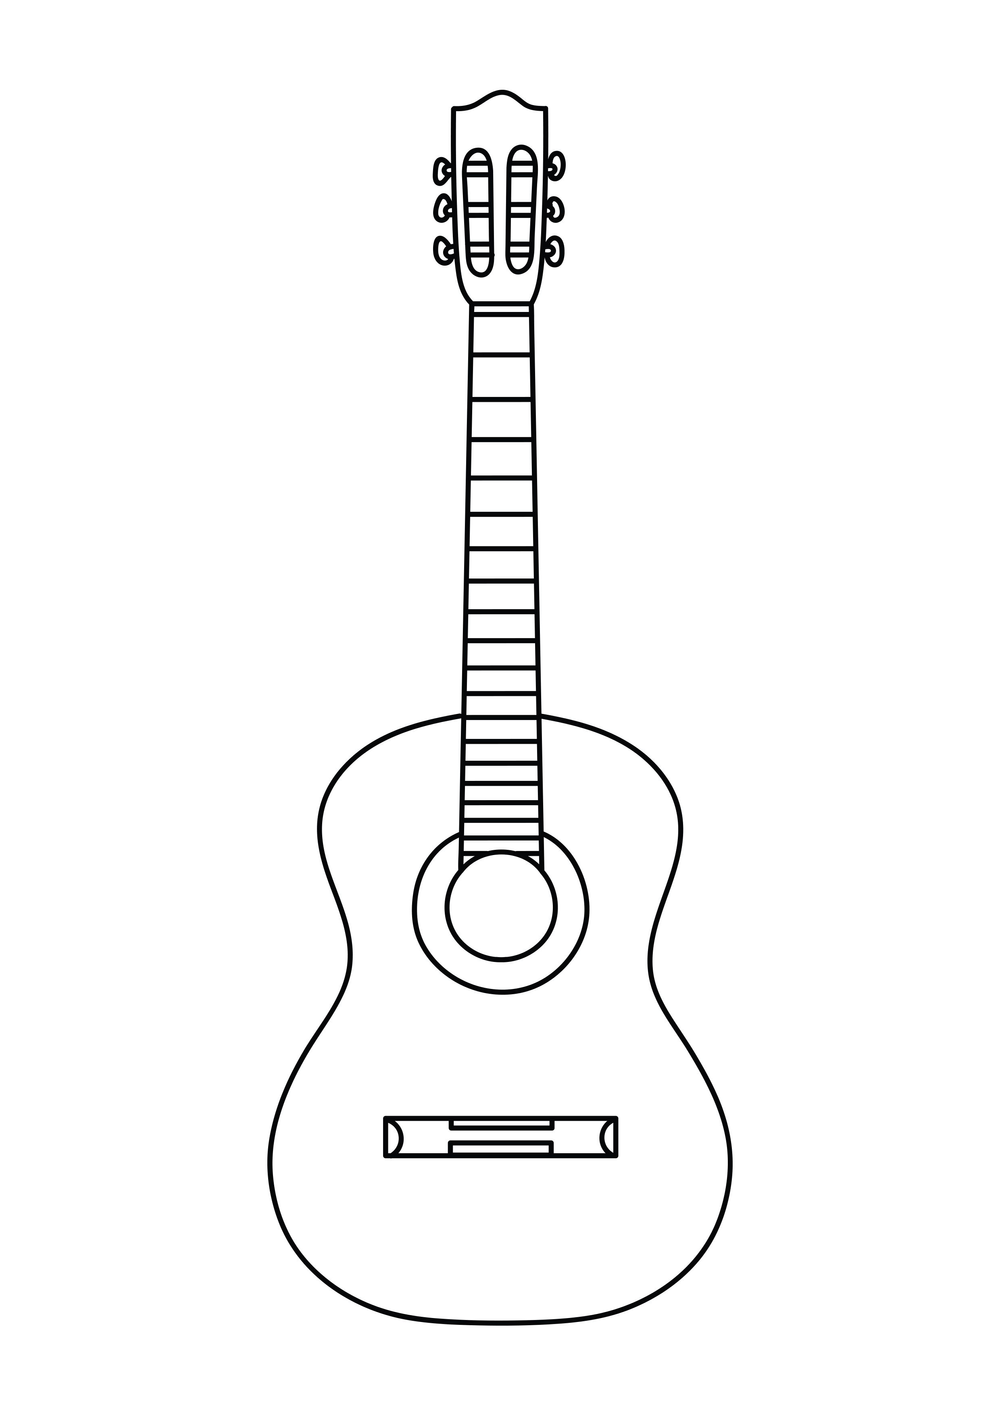 Guitar template â the quirky quillers